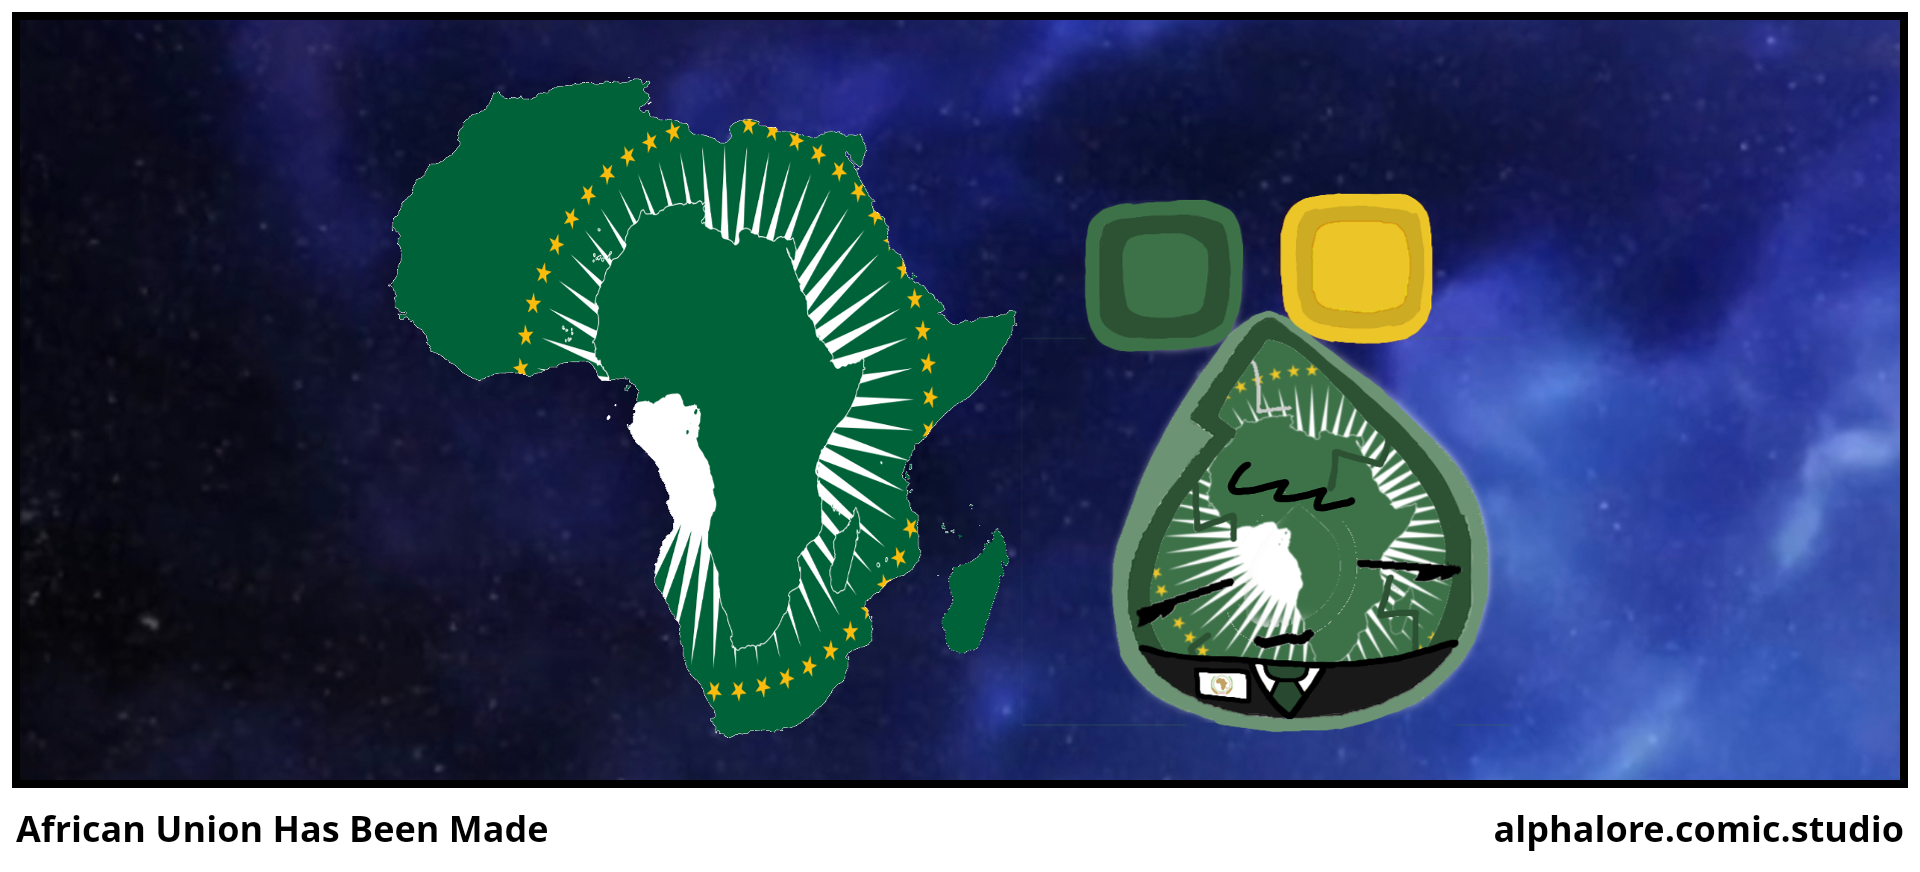 African Union Has Been Made